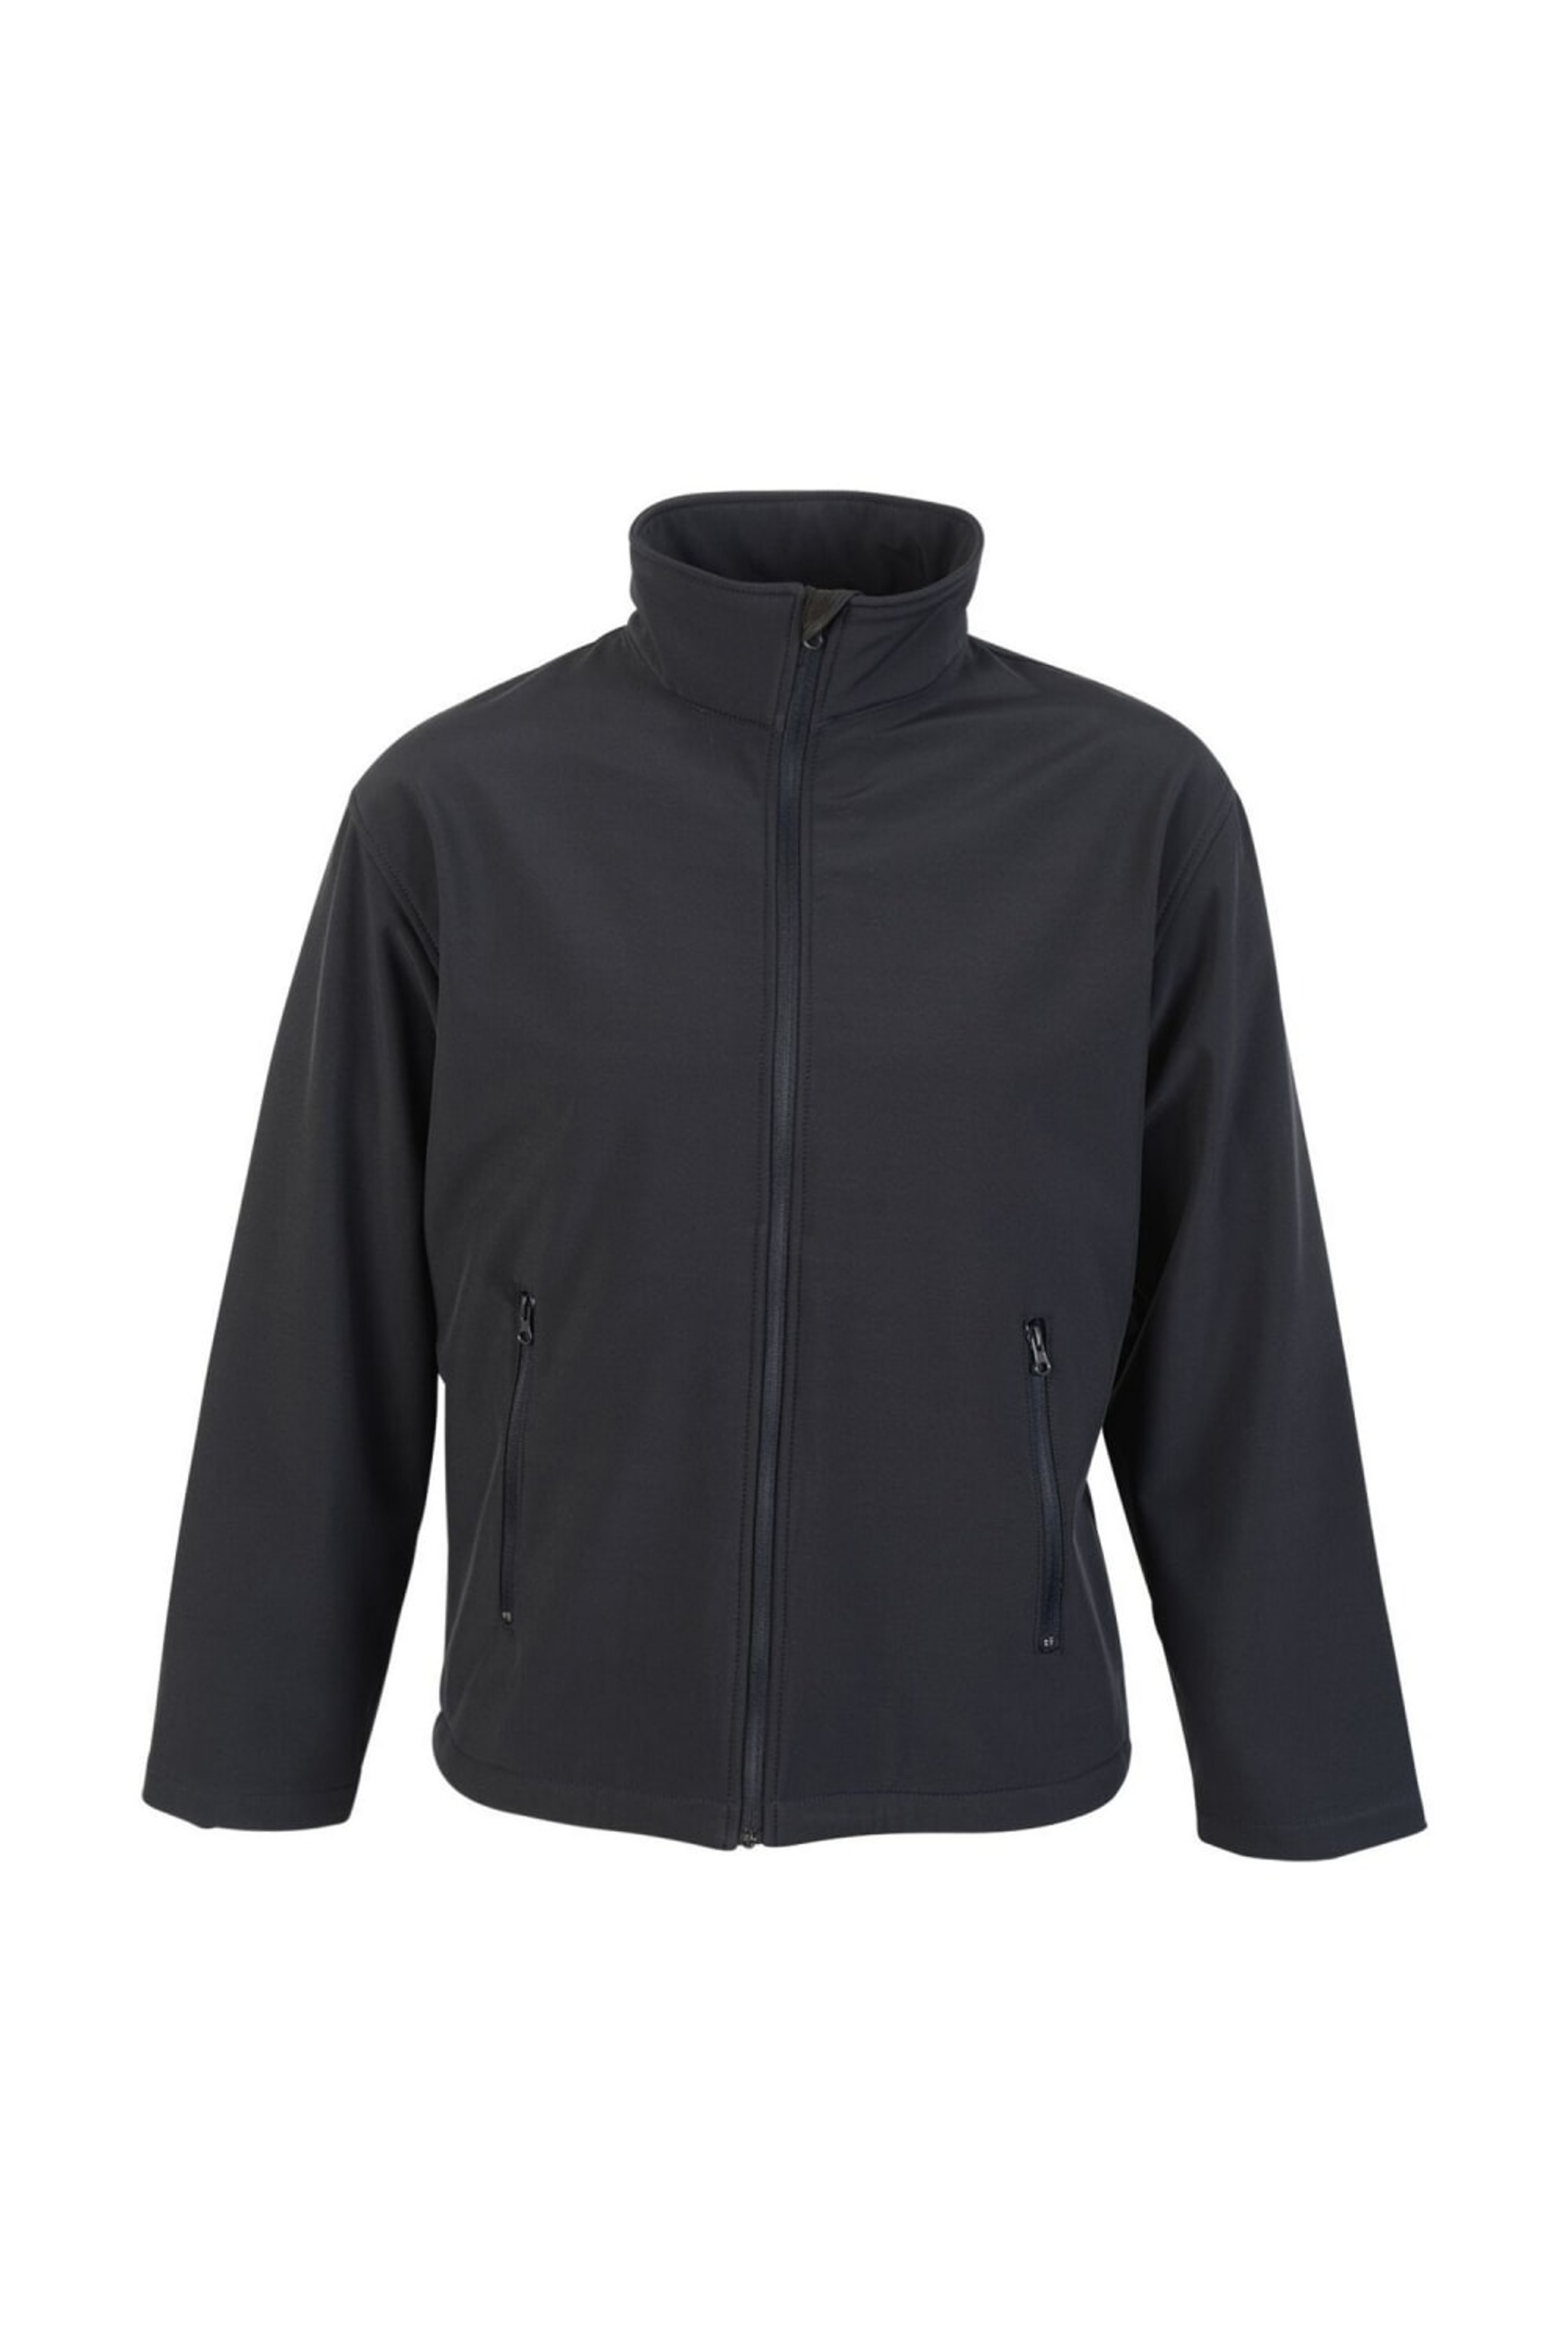 ABSOLUTE APPAREL ABSOLUTE APPAREL MENS CLASSIC SOFTSHELL JACKET